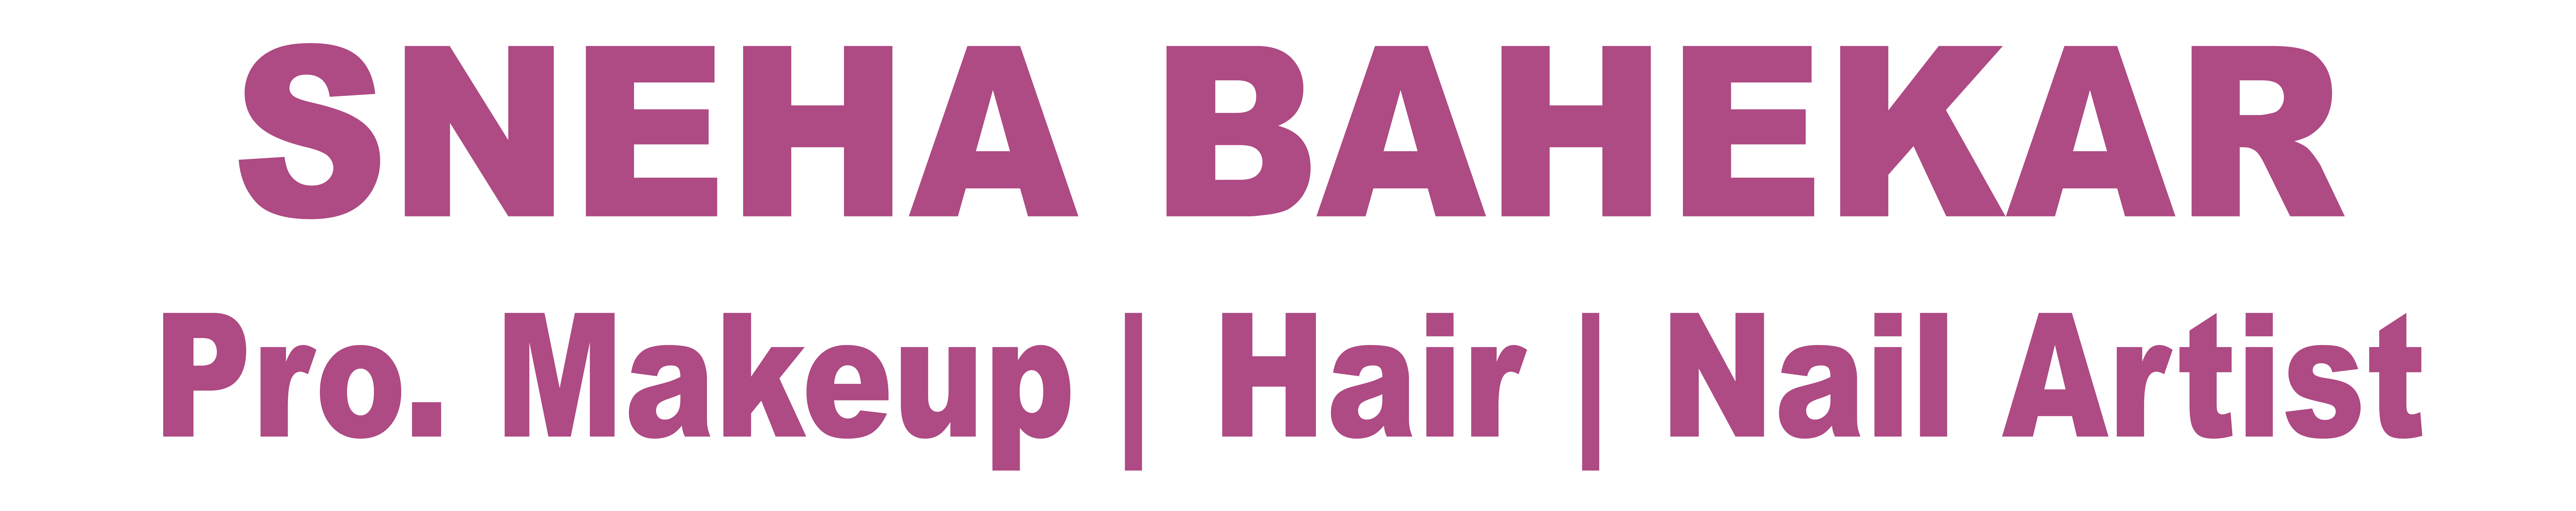 Basic to Advance Hair Style Course in Wakad, PCMC, Pune - Sneha Bahekar  Academy